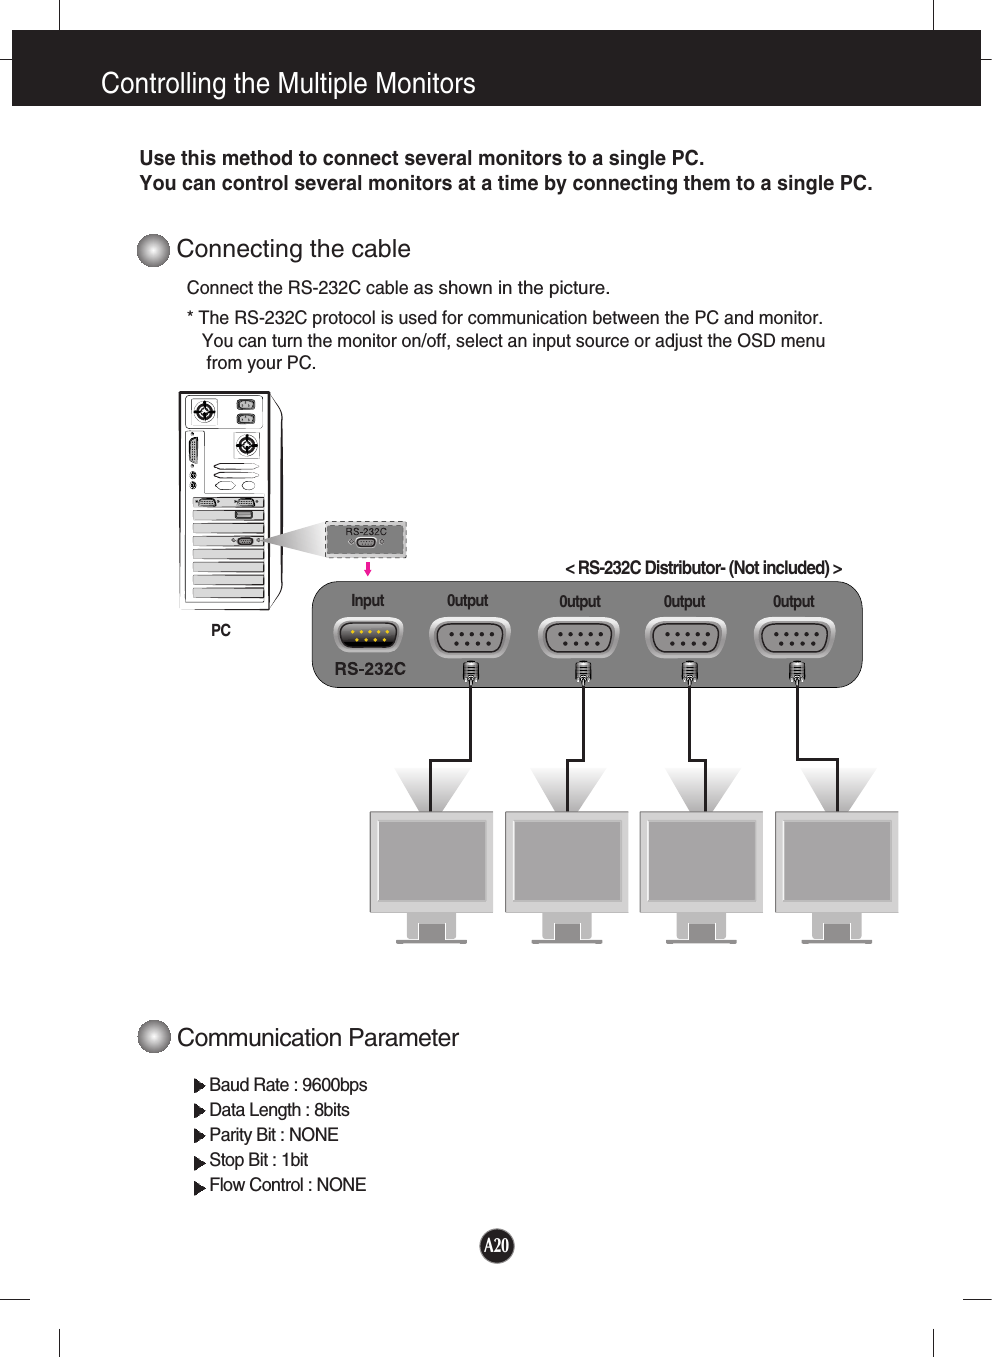 A20Controlling the Multiple MonitorsConnecting the cableConnect the RS-232C cable as shown in the picture.* The RS-232C protocol is used for communication between the PC and monitor. You can turn the monitor on/off, select an input source or adjust the OSD menufrom your PC.Baud Rate : 9600bpsData Length : 8bitsParity Bit : NONEStop Bit : 1bitFlow Control : NONEUse this method to connect several monitors to a single PC.You can control several monitors at a time by connecting them to a single PC. Communication ParameterPC0utput 0utput0utput0utput&lt; RS-232C Distributor- (Not included) &gt;Input